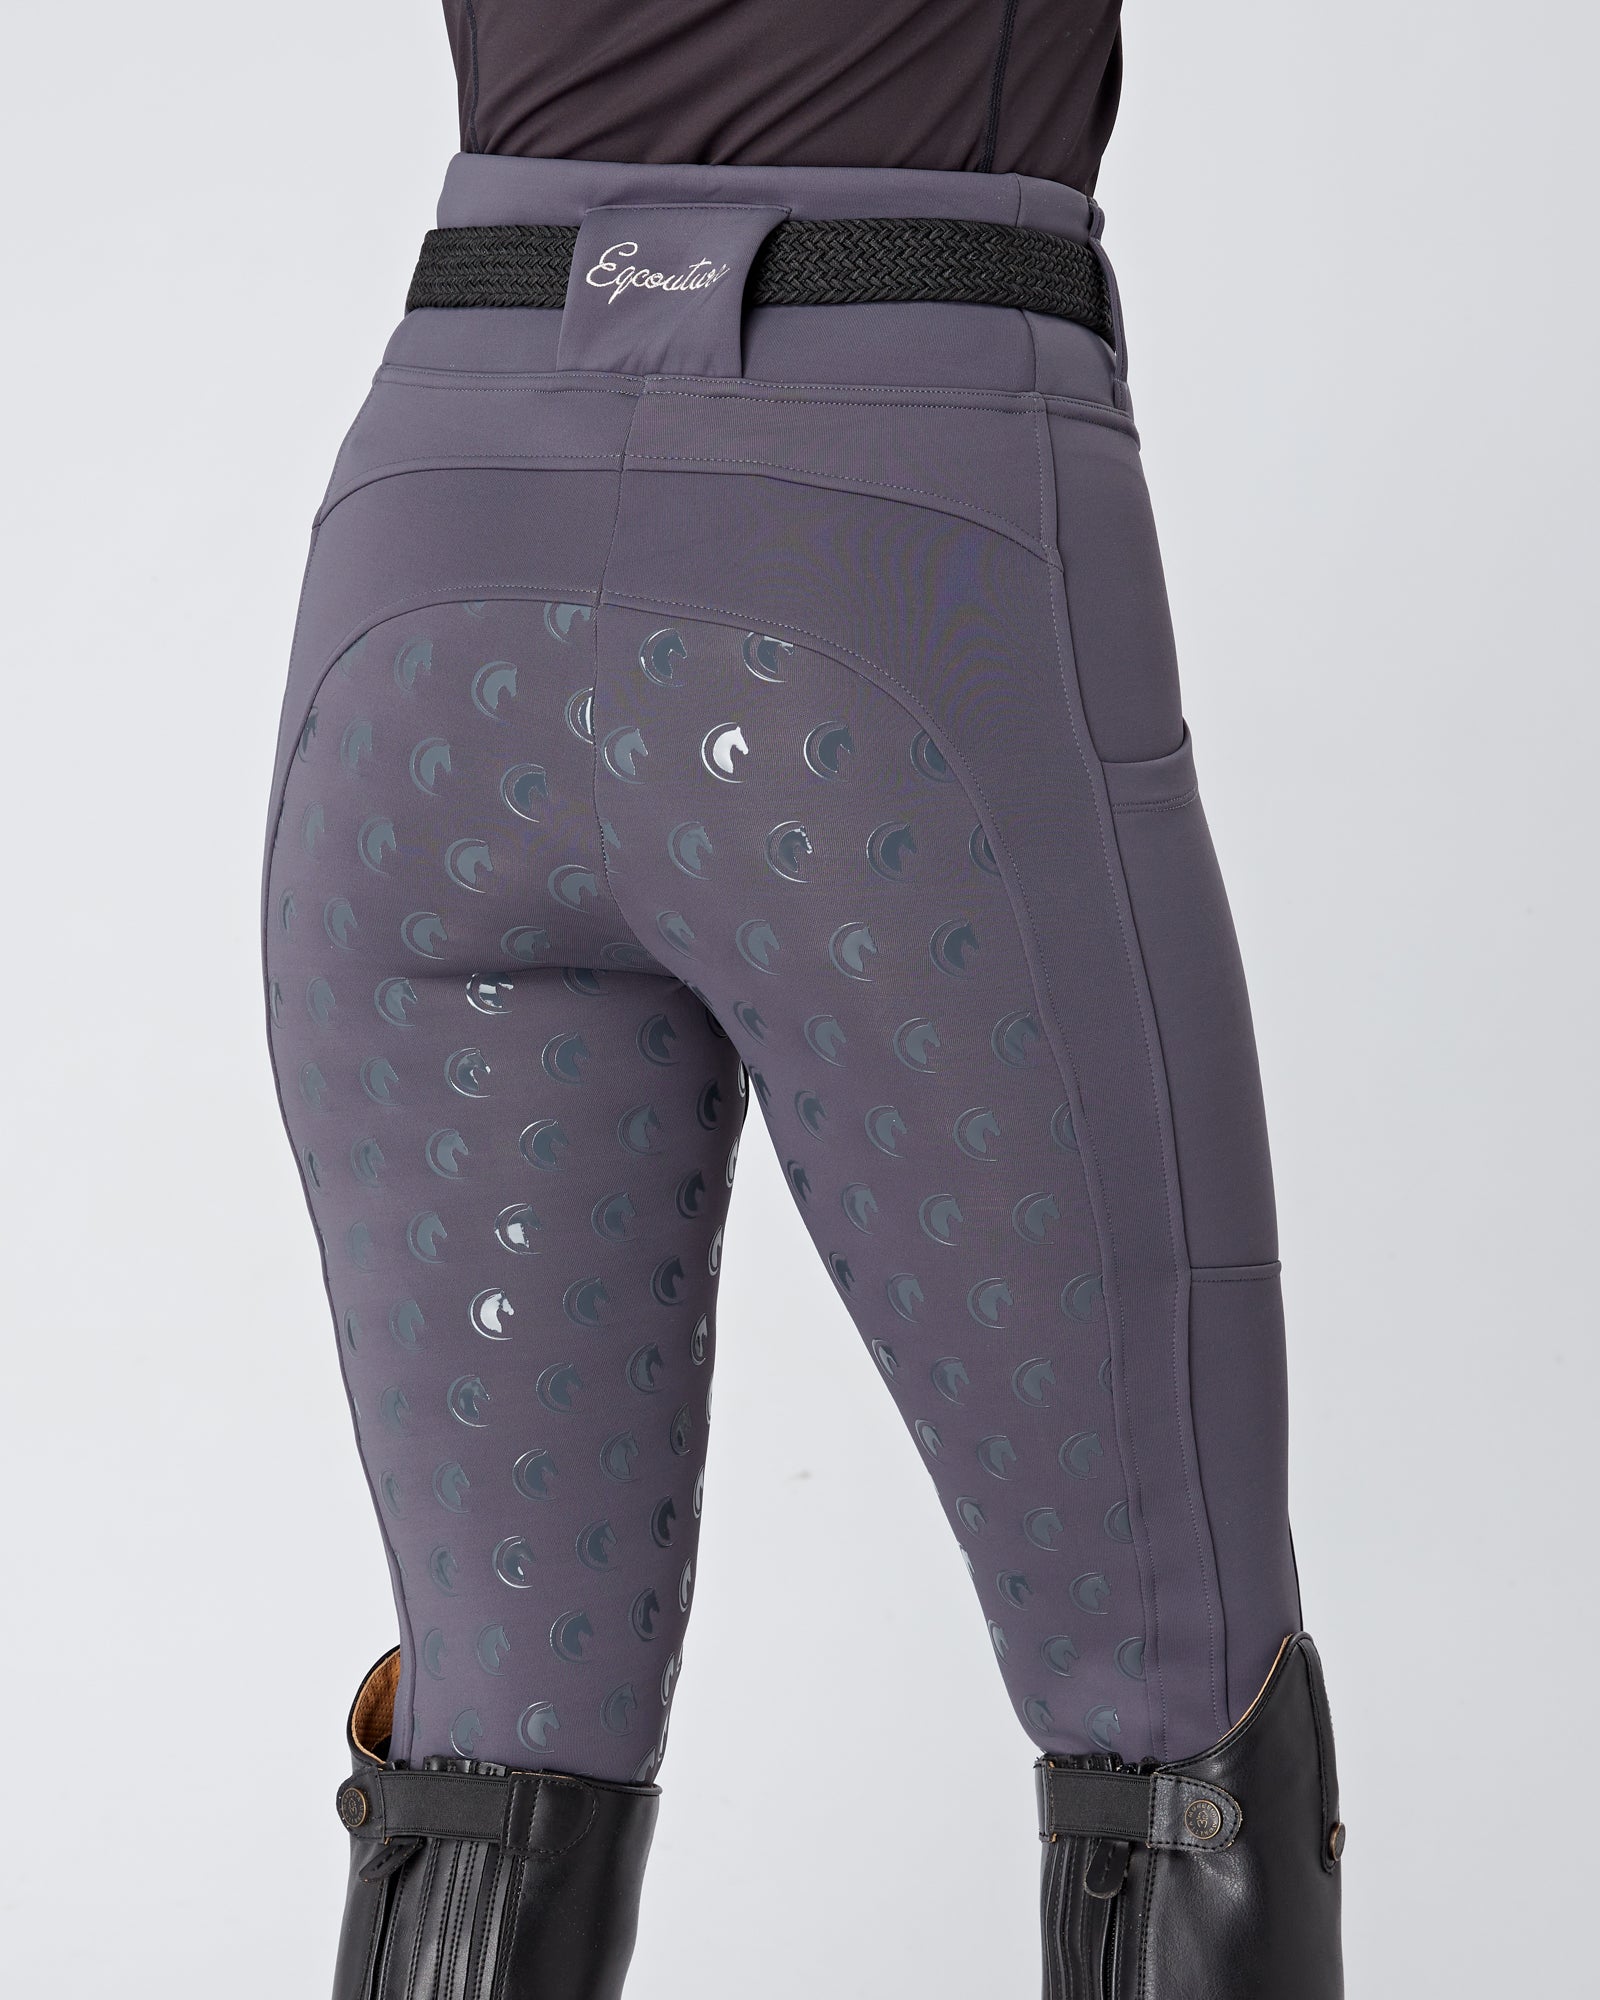 Winter Thermal Horse Riding Tights / Leggings w/ phone pockets - GREY –  Eqcouture